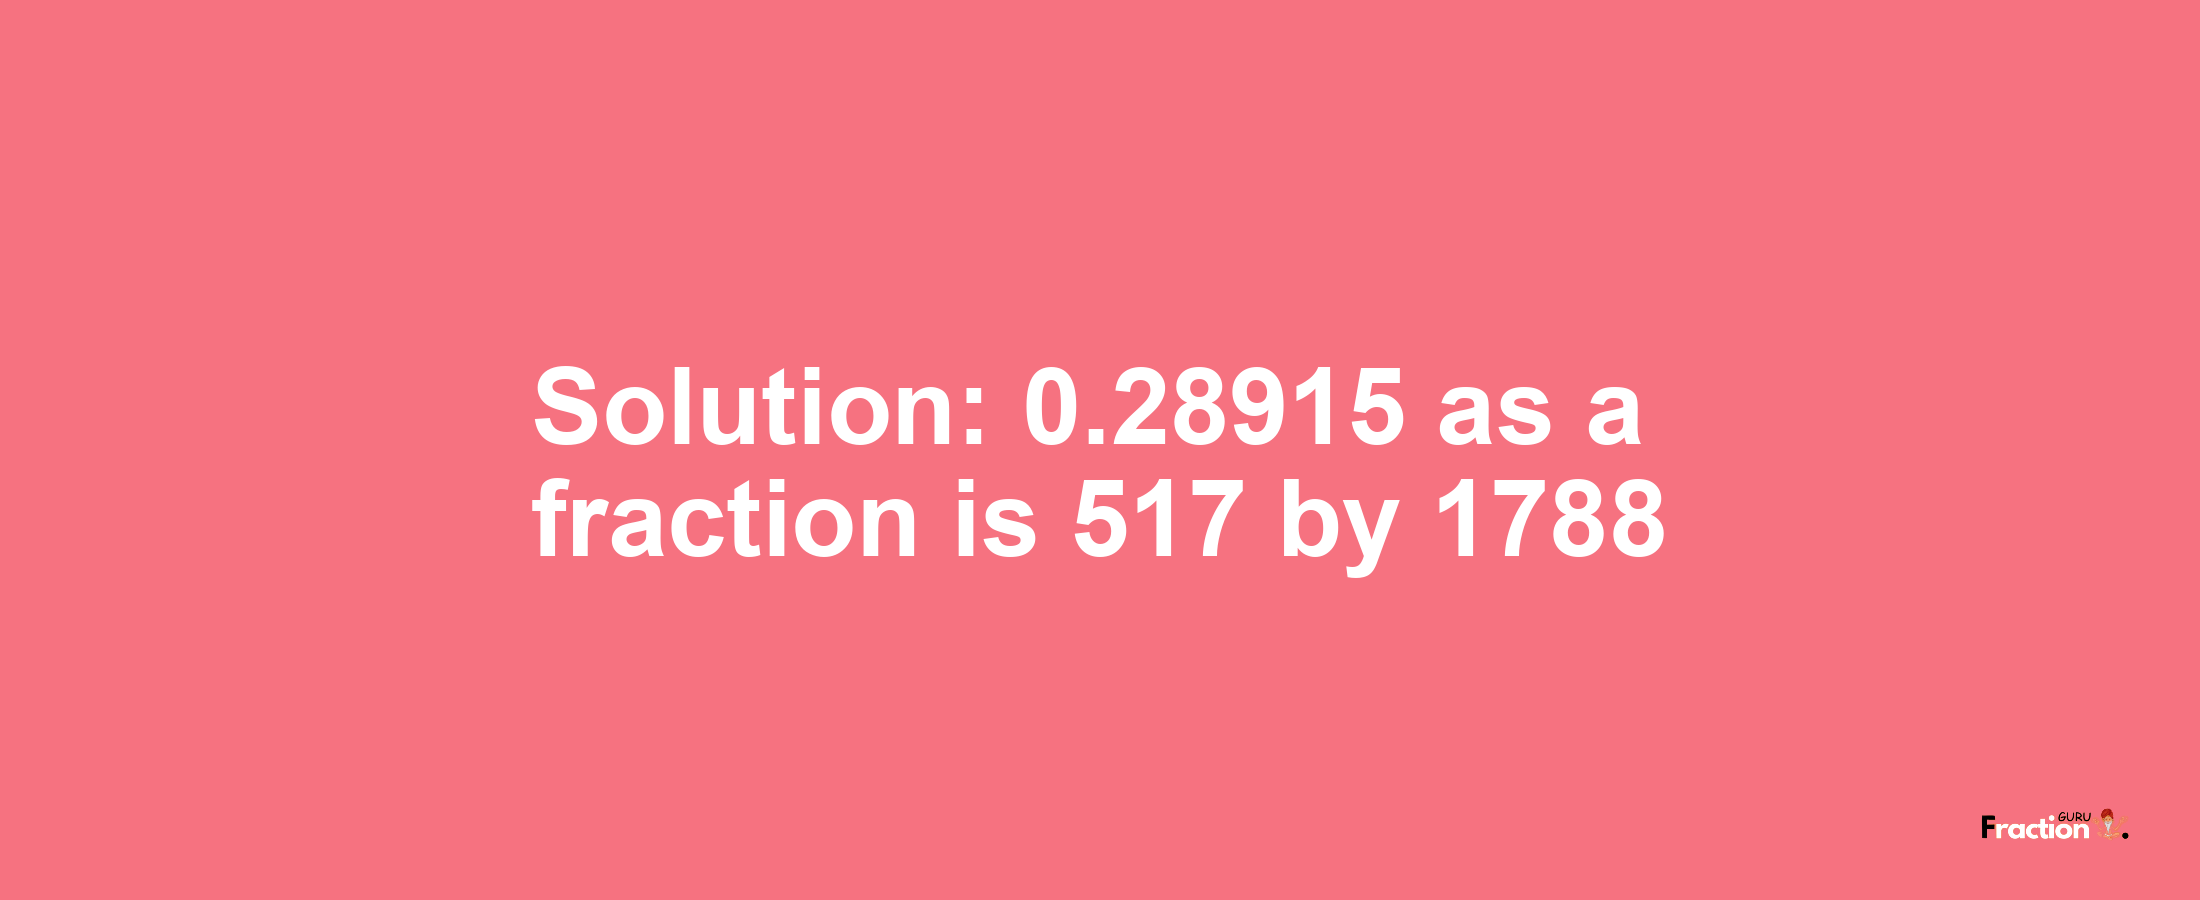 Solution:0.28915 as a fraction is 517/1788